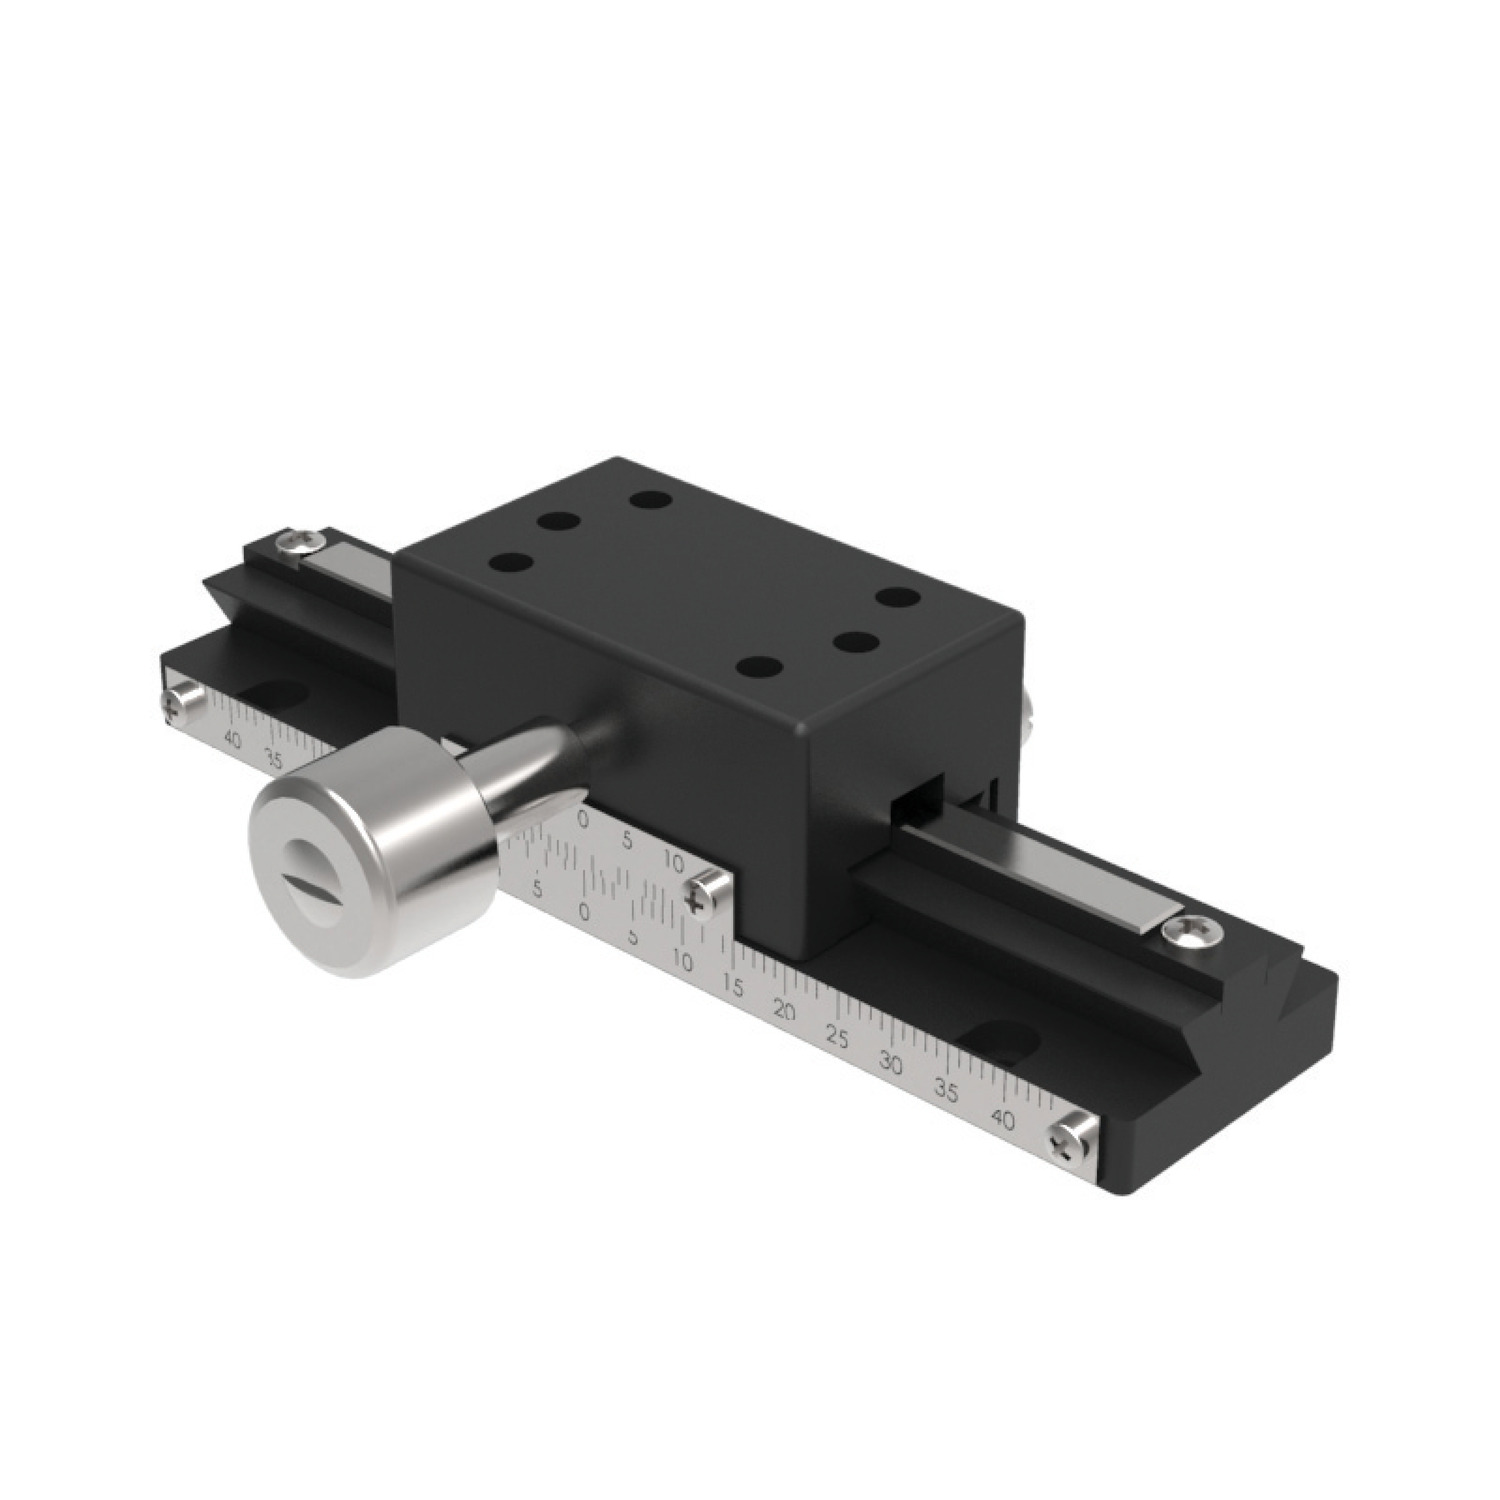 Product L3305, Dovetail Stages - Rack & Pinion long stroke, X axis / 